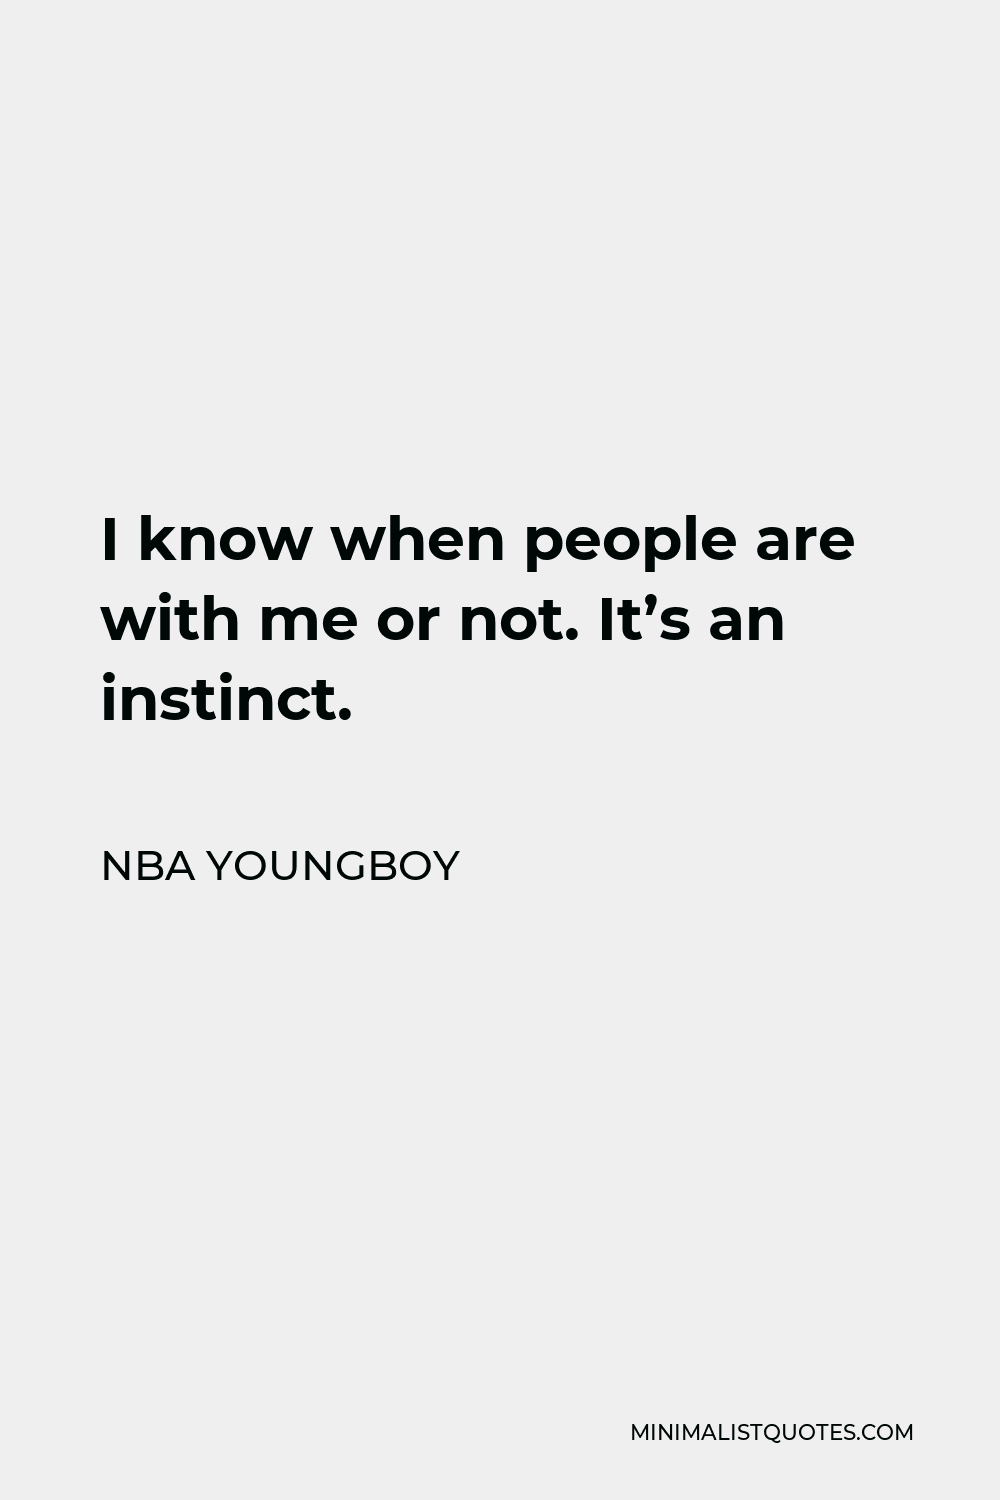 NBA Youngboy Quote: I know when people are with me or not. It's an instinct.